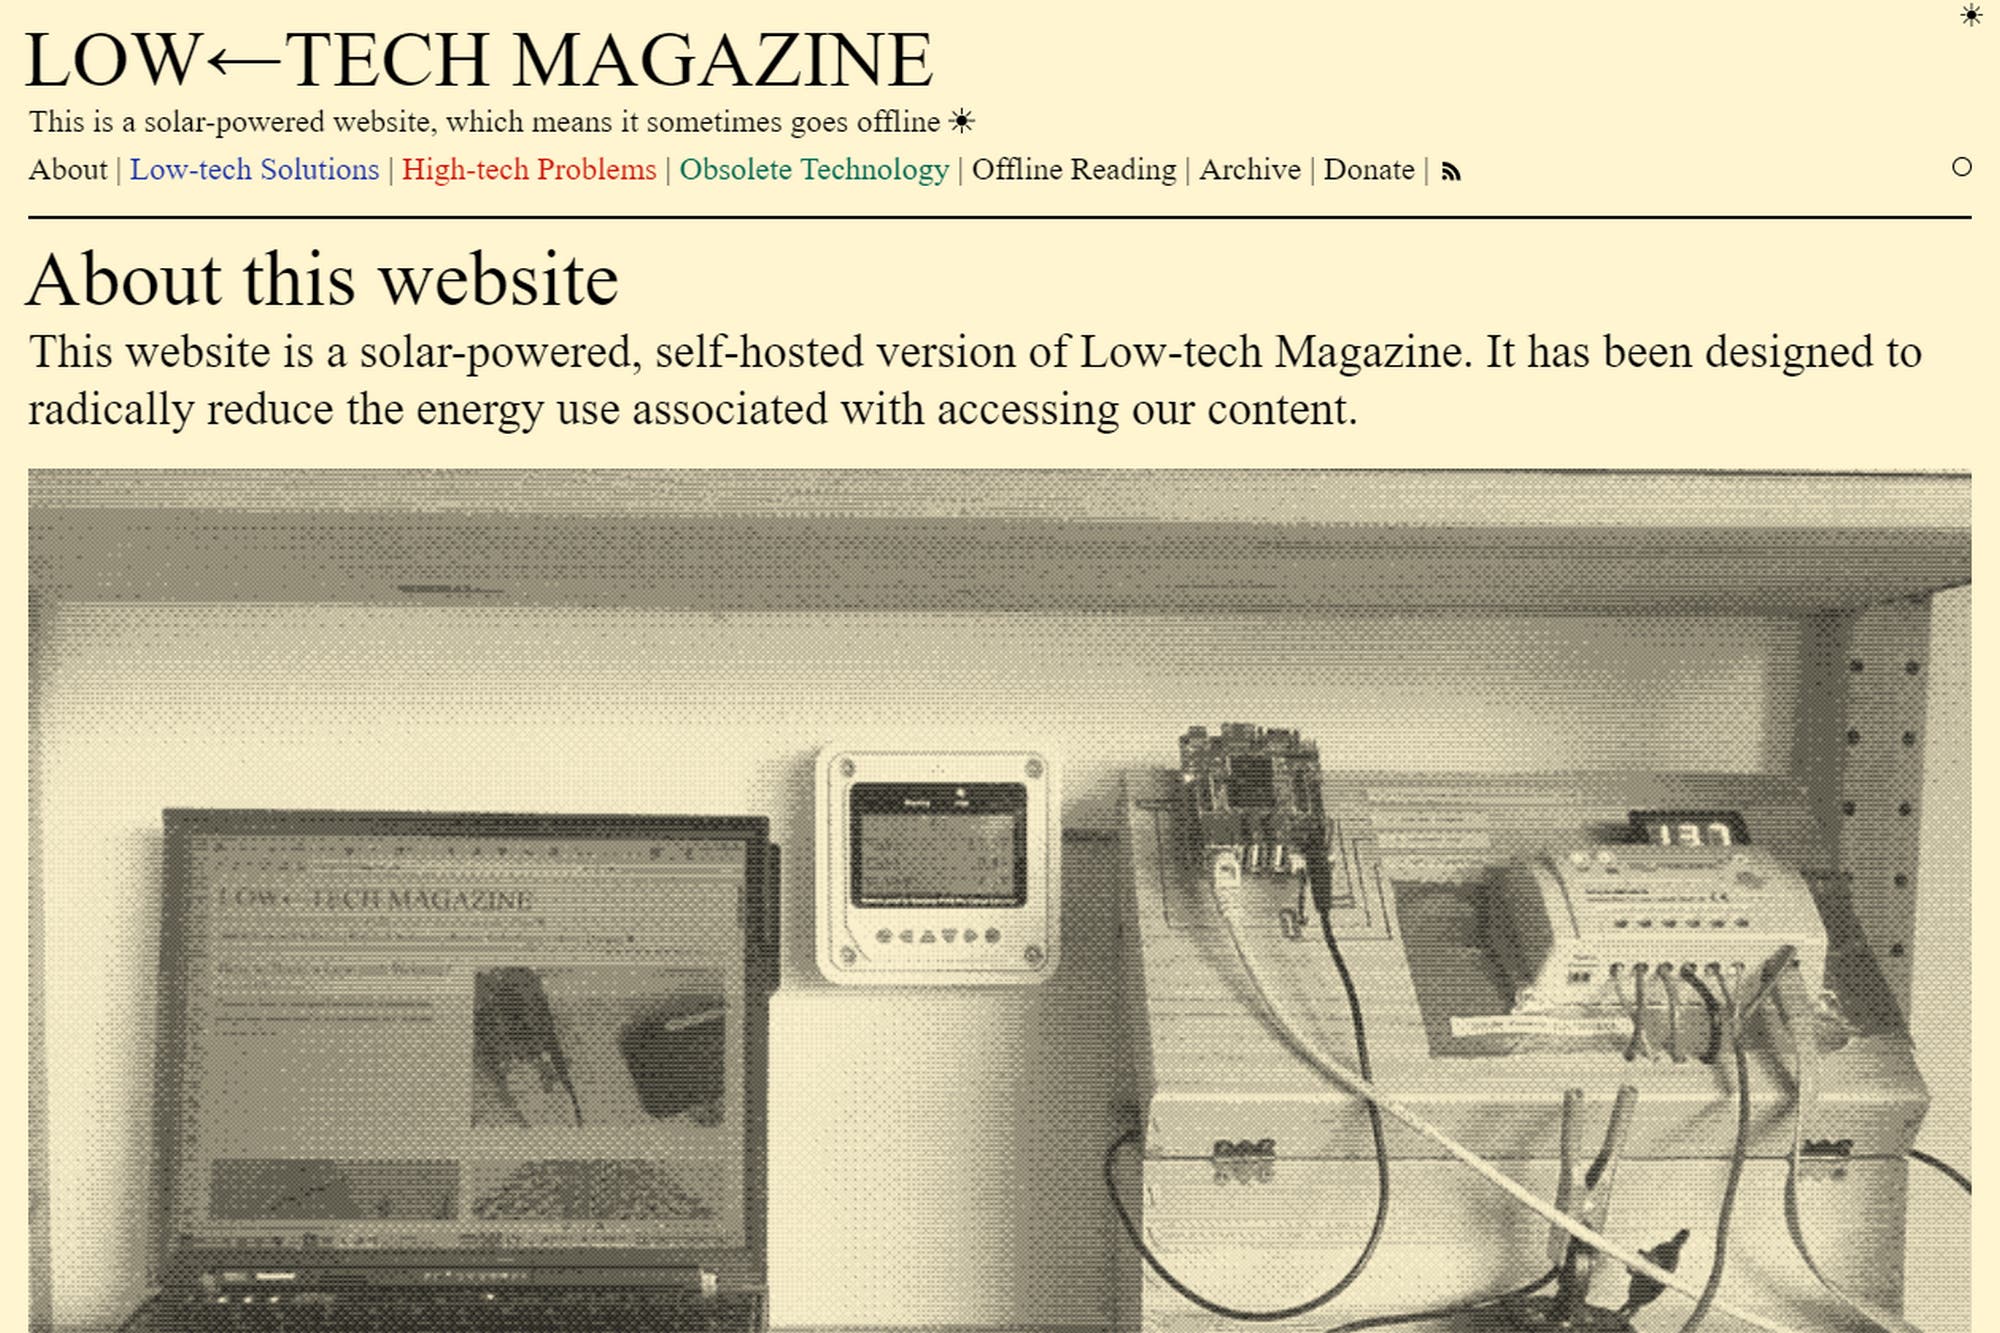 Sustainable Internet: they create a website that works only with solar energy